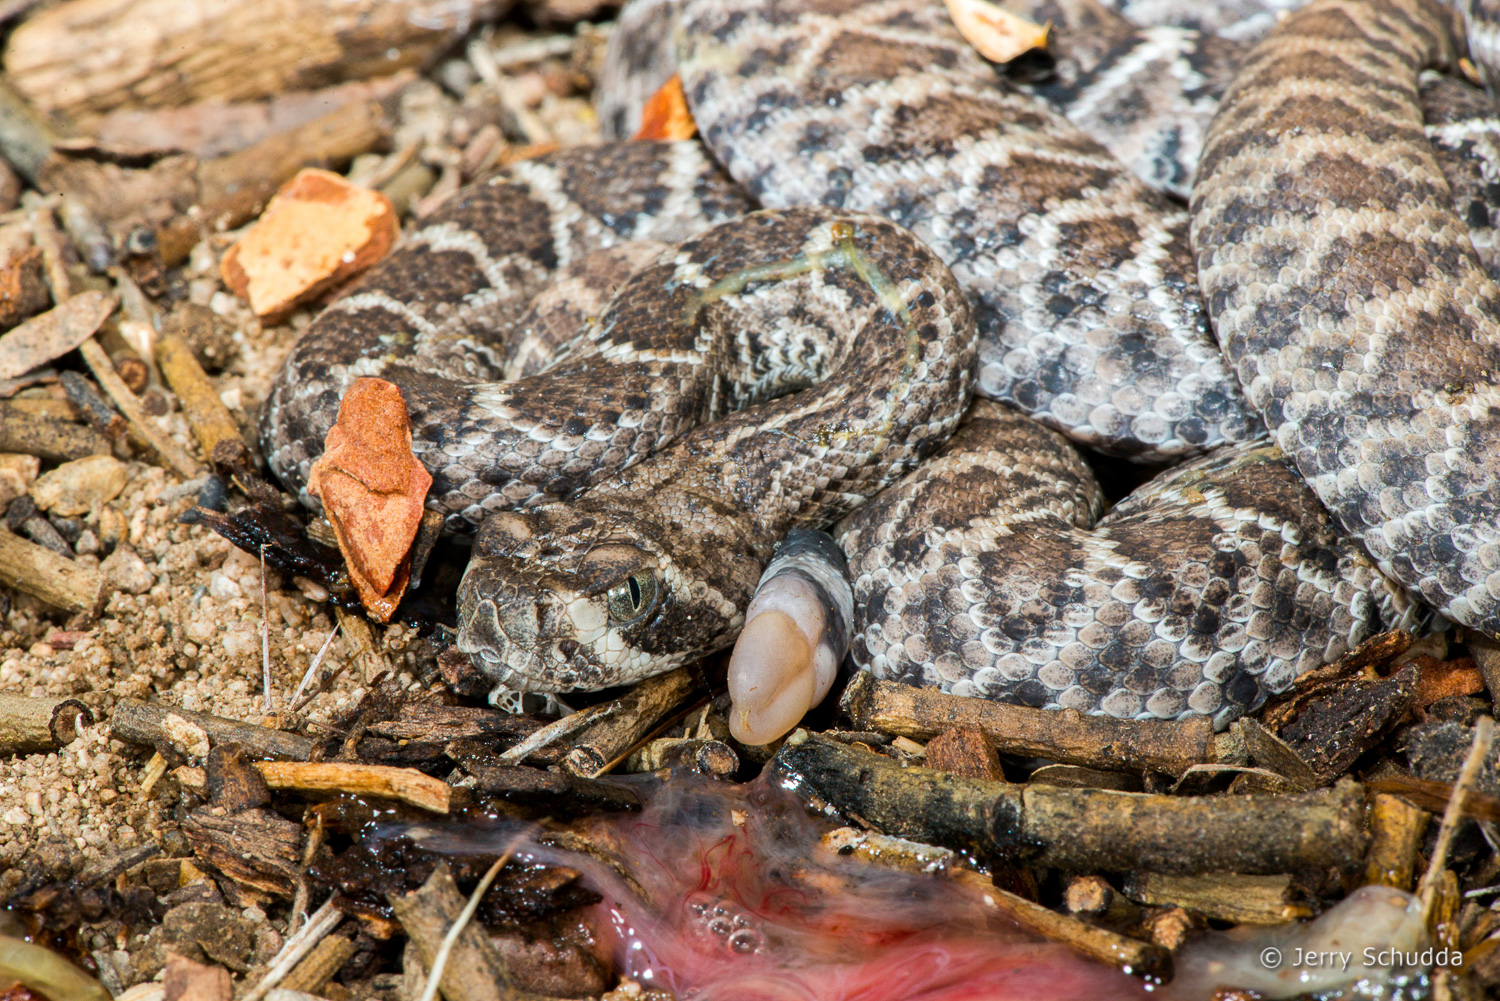 Western Diamondback Rattlesnake - note this species gives birth to live young. ...